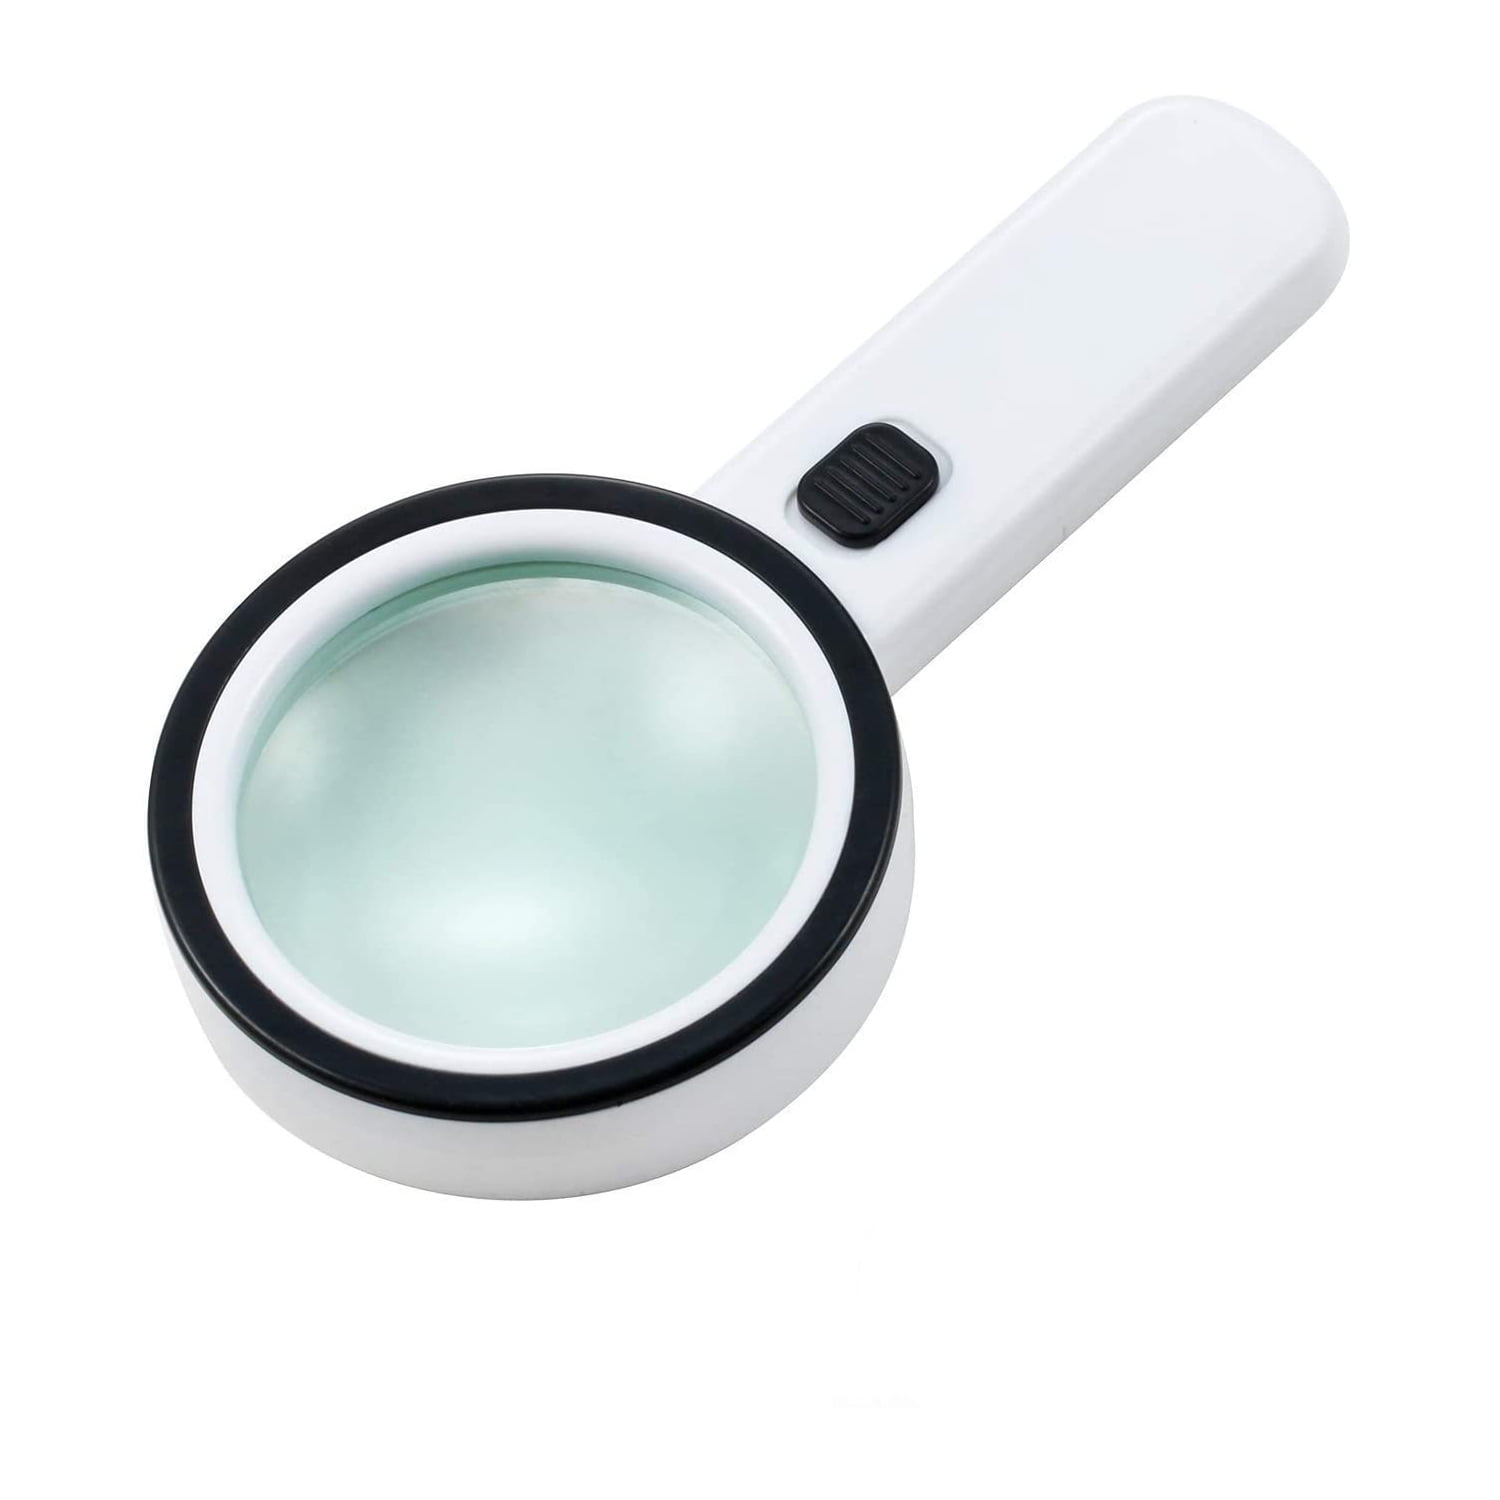 Haobase 30x High Handheld Strong Magnifying Glass with 12 LED 